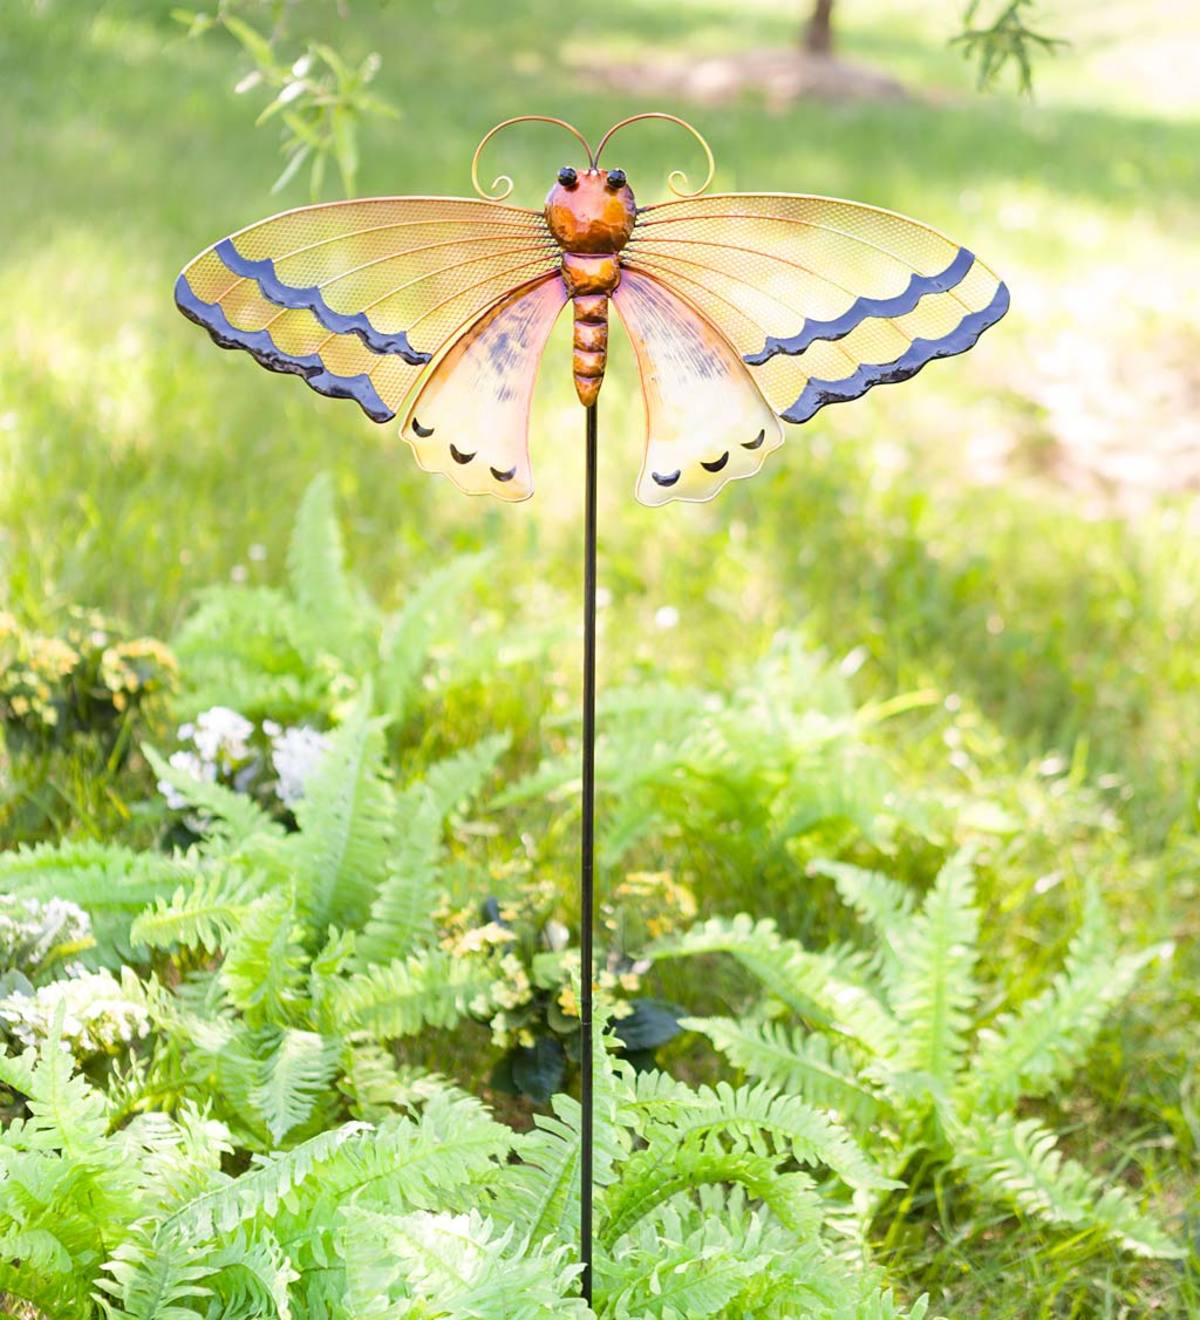 Gold and Black Metal Butterfly Decorative Garden Stake